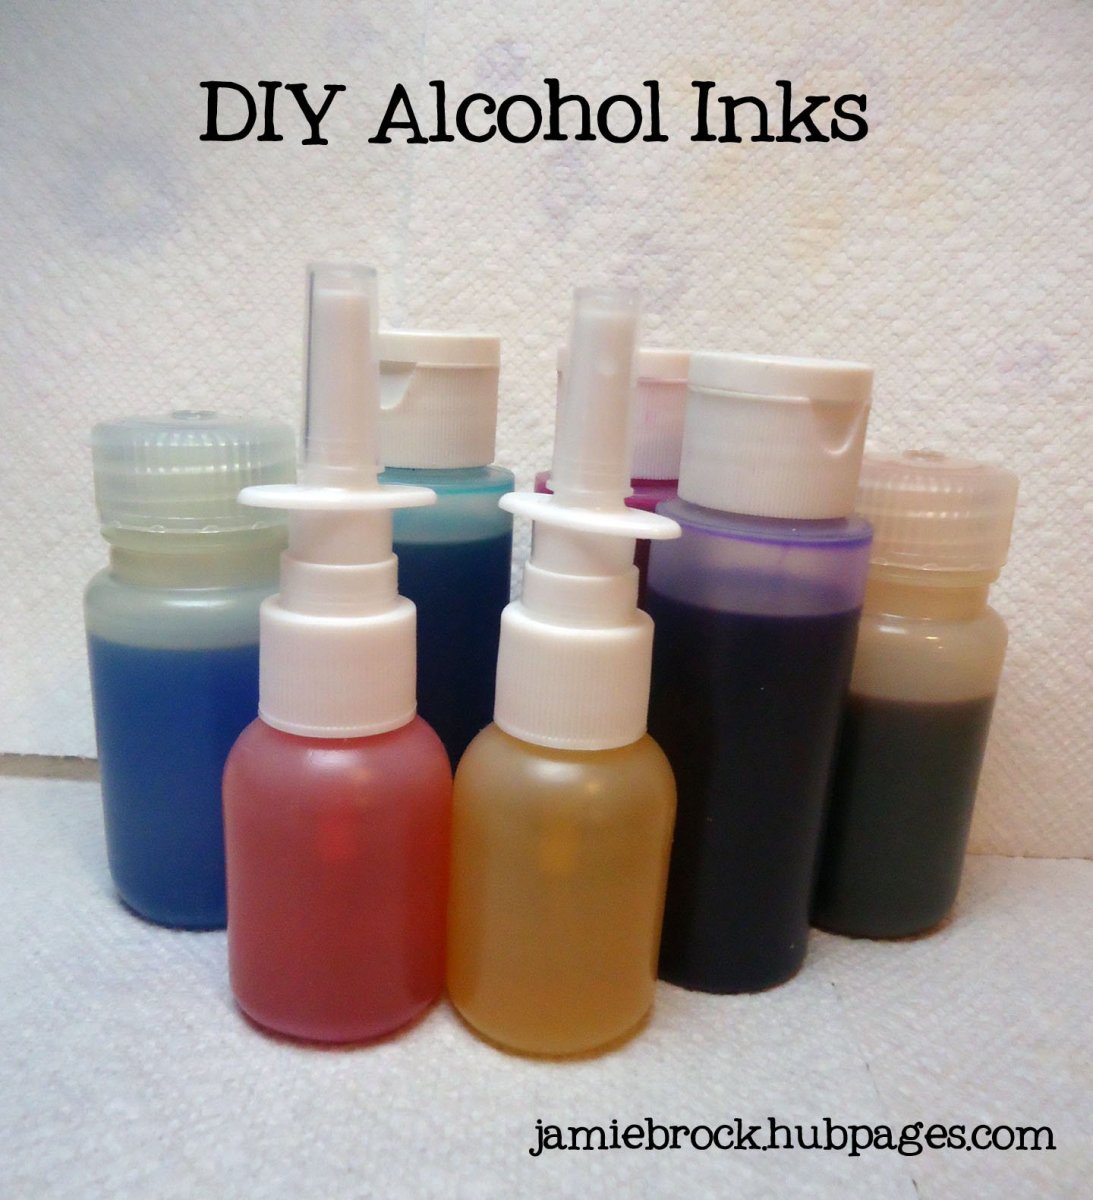 DIY Craft Supplies: Make Your Own Alcohol Inks